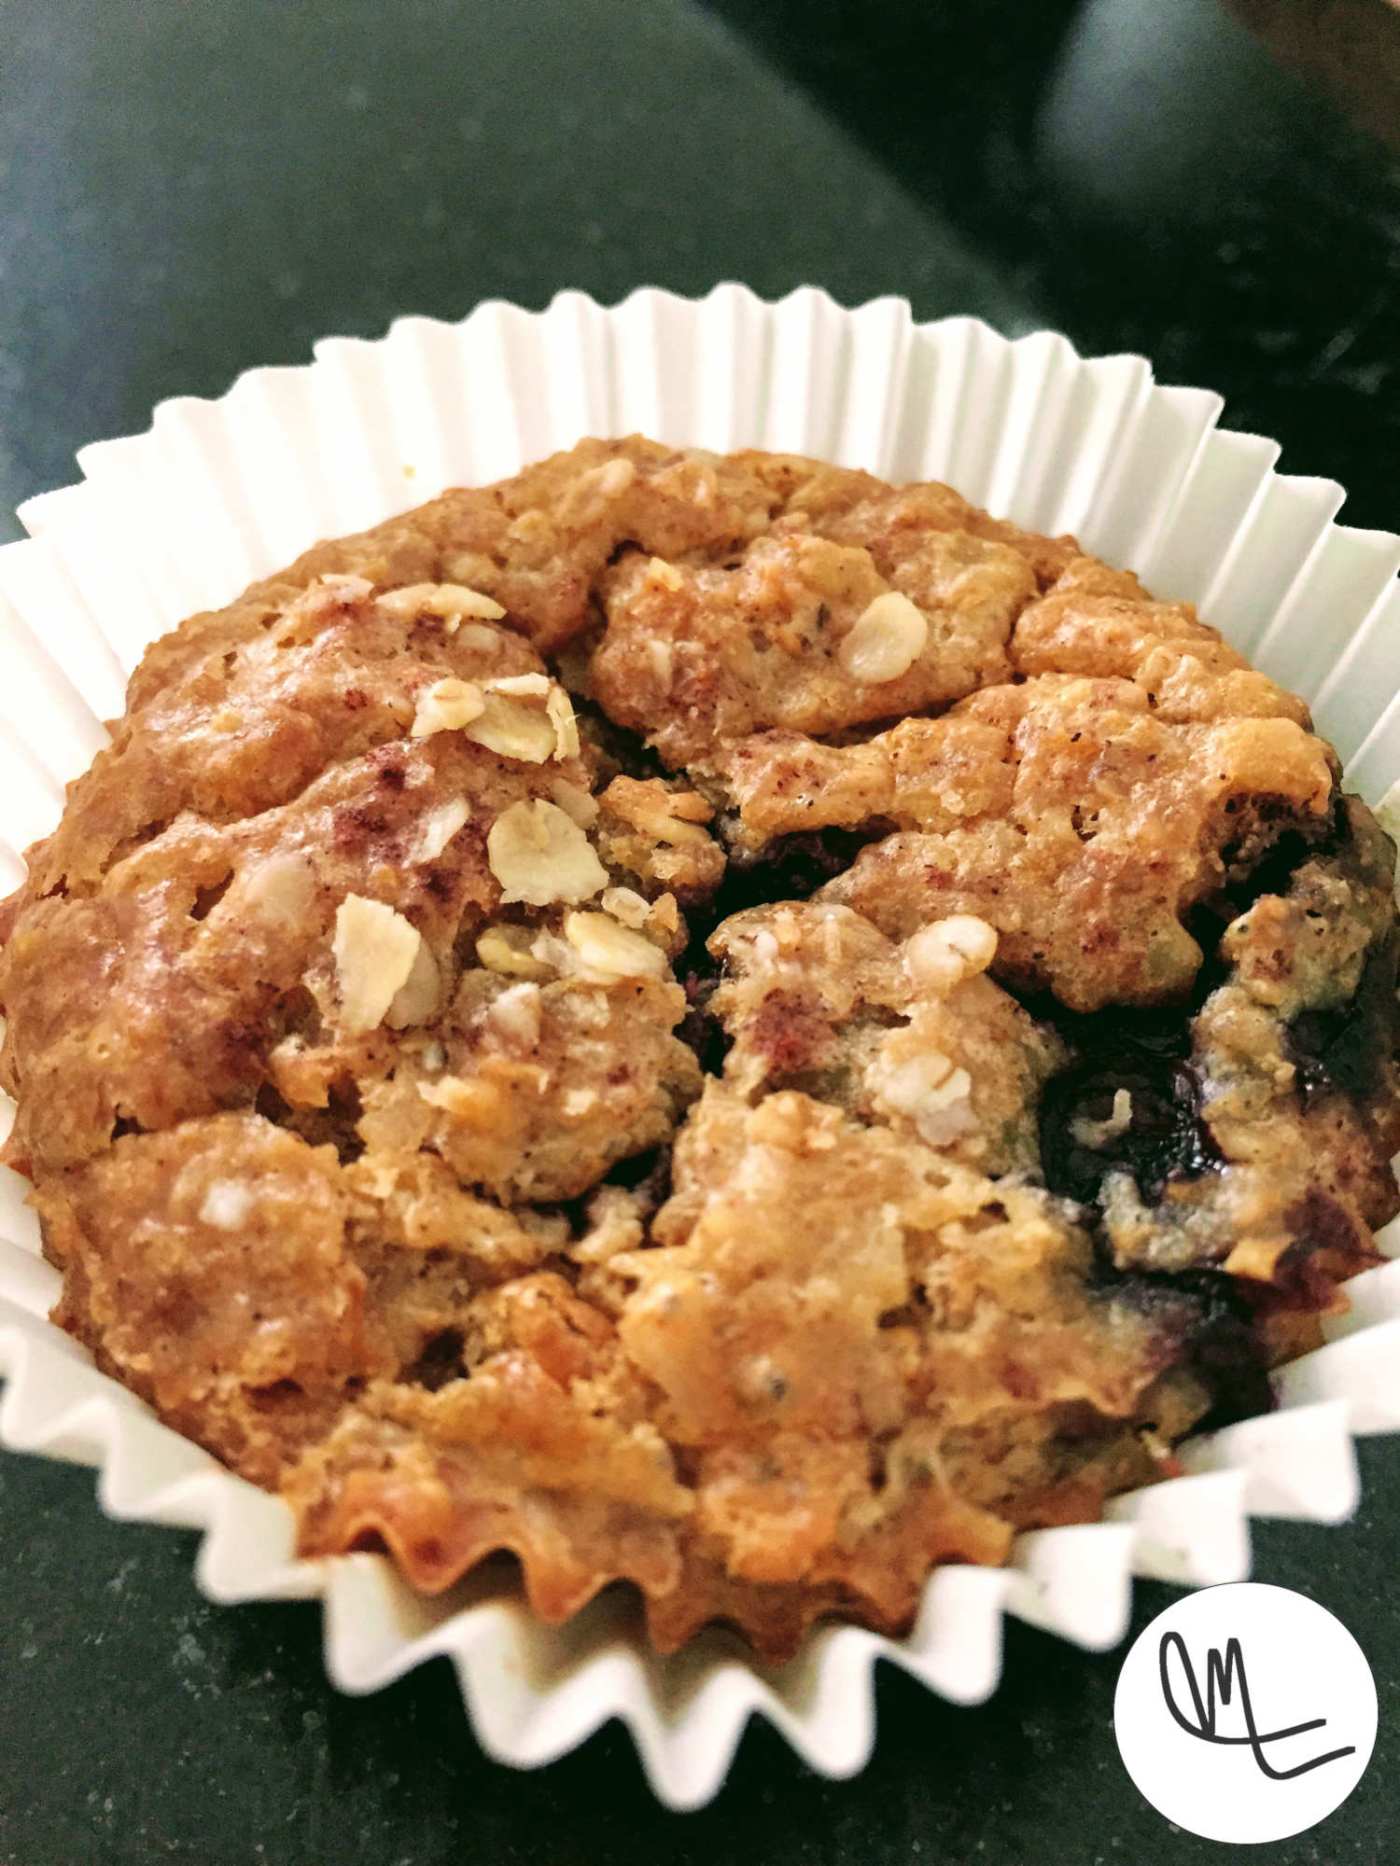 Oat blueberry muffin in a muffin paper cup, sprinkled with a few oats.